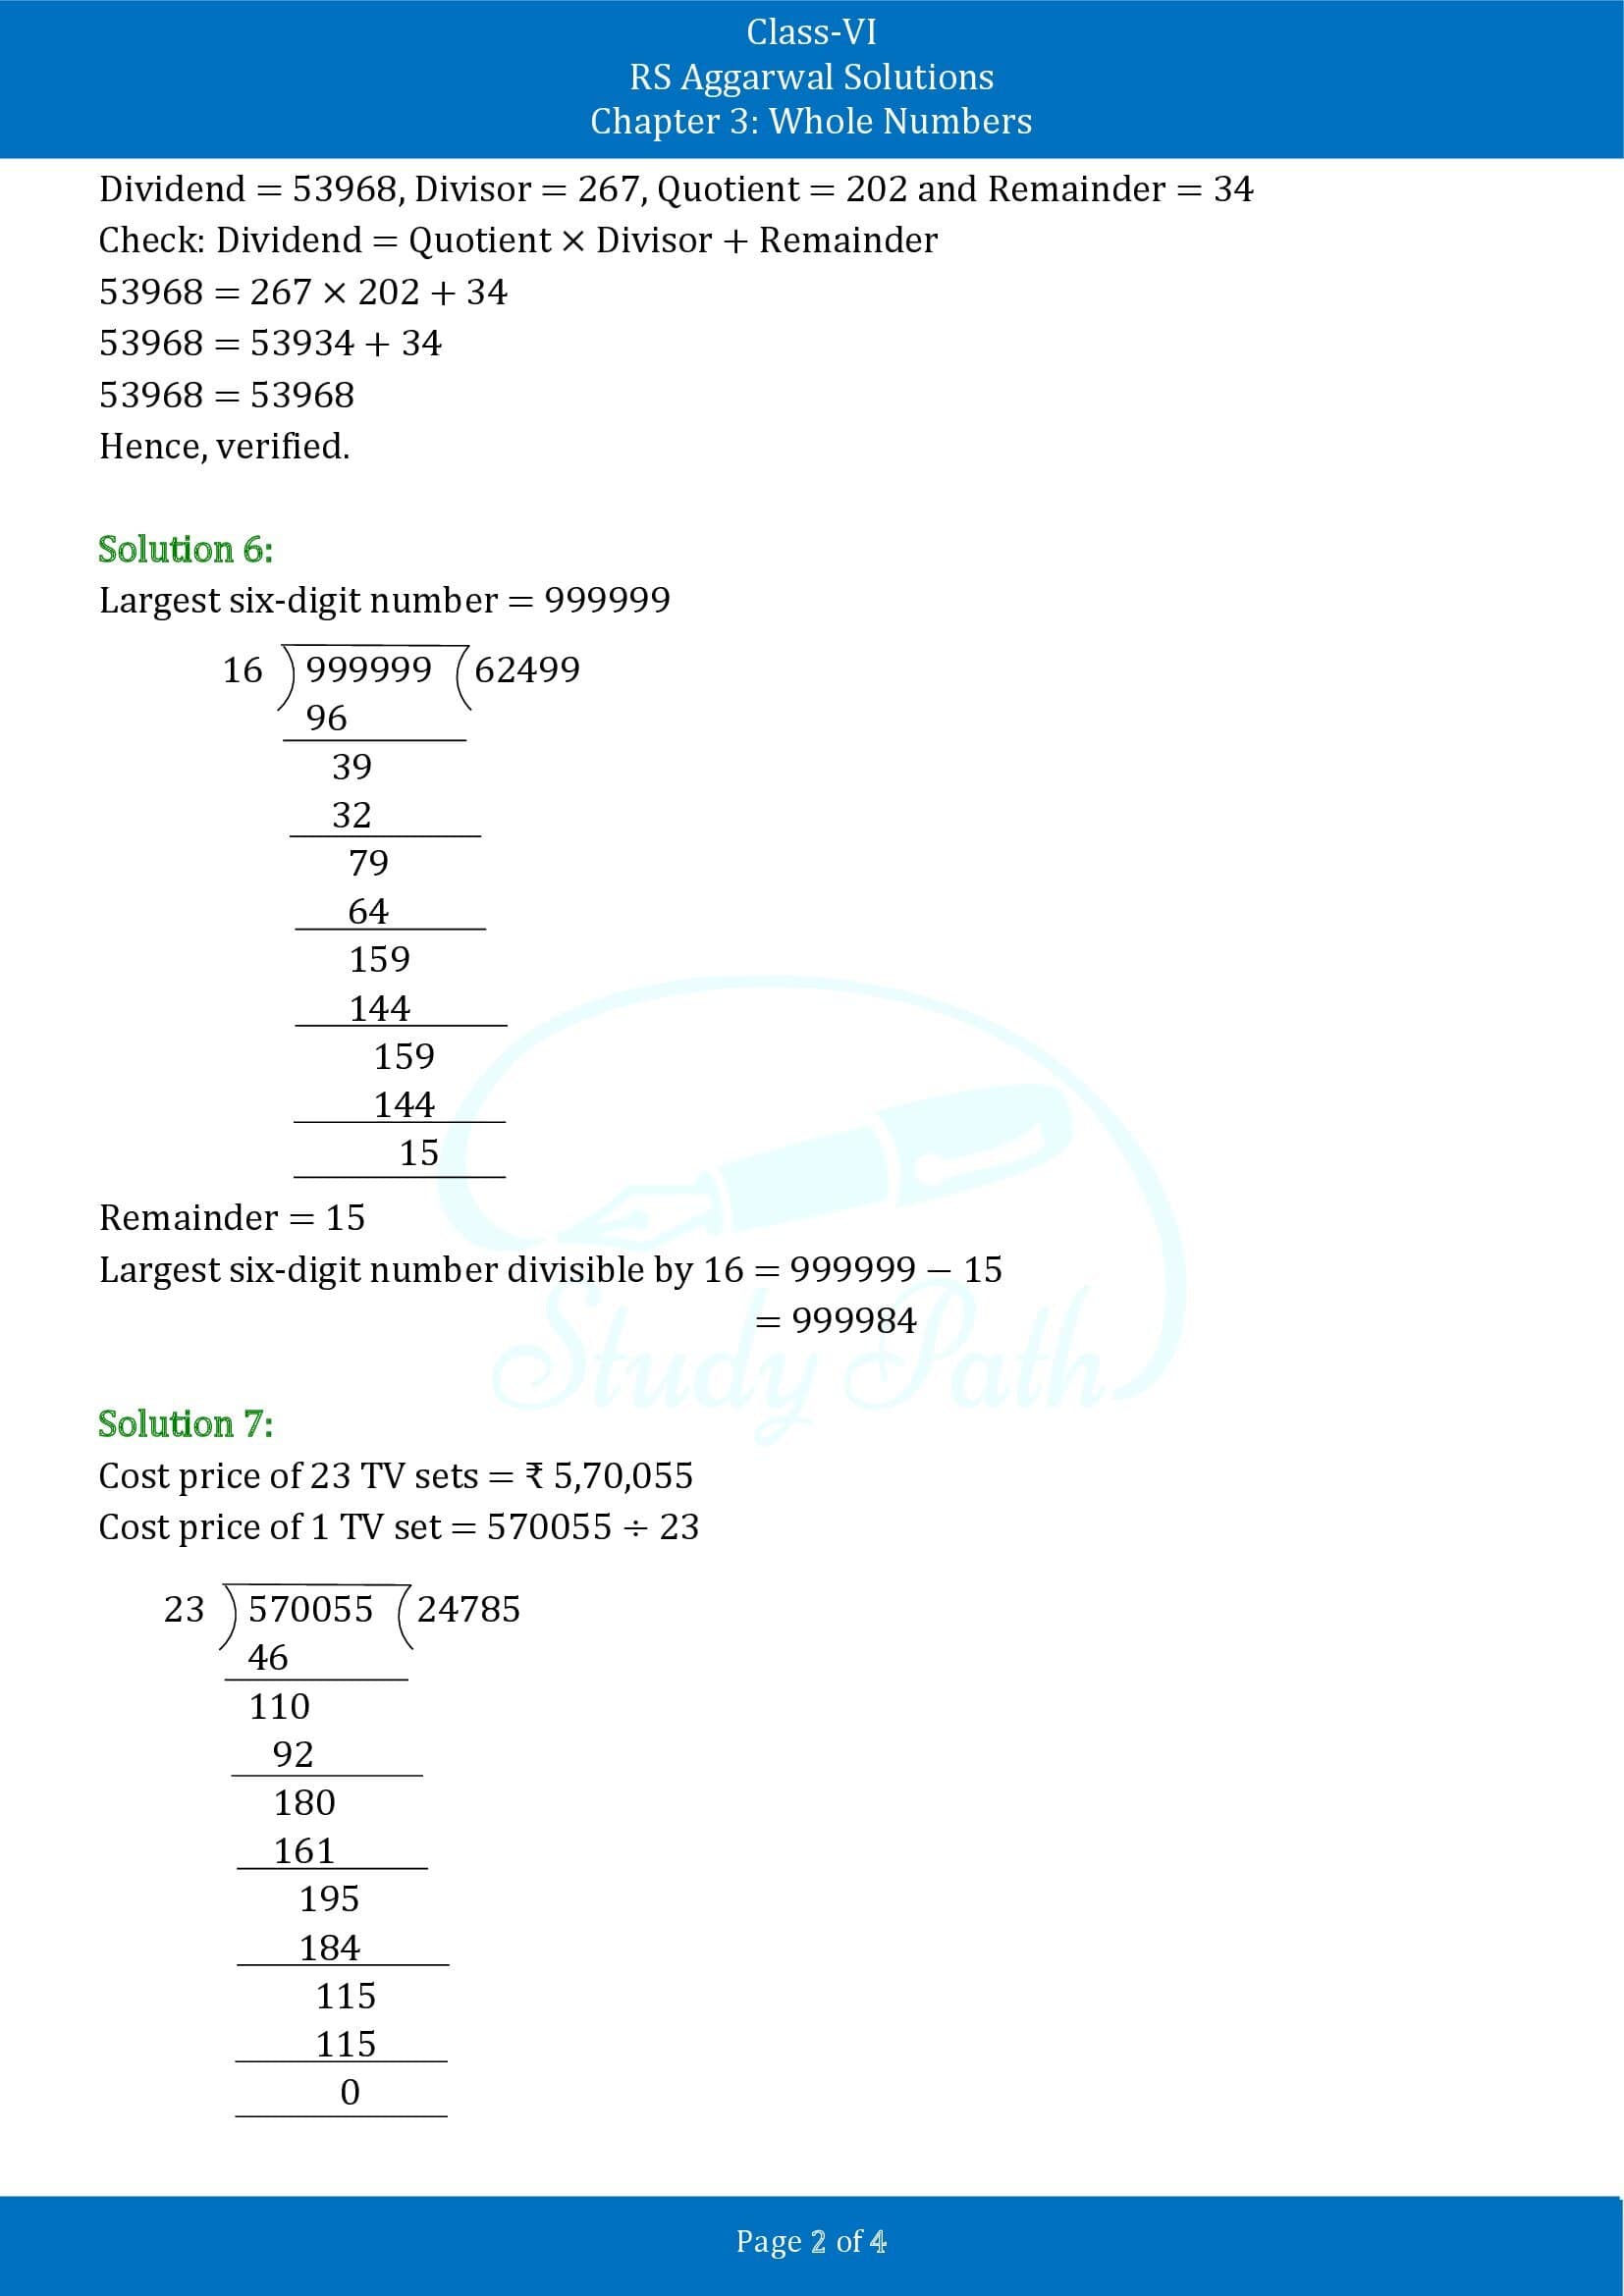 RS Aggarwal Solutions Class 6 Chapter 3 Whole Numbers Test Paper 00002